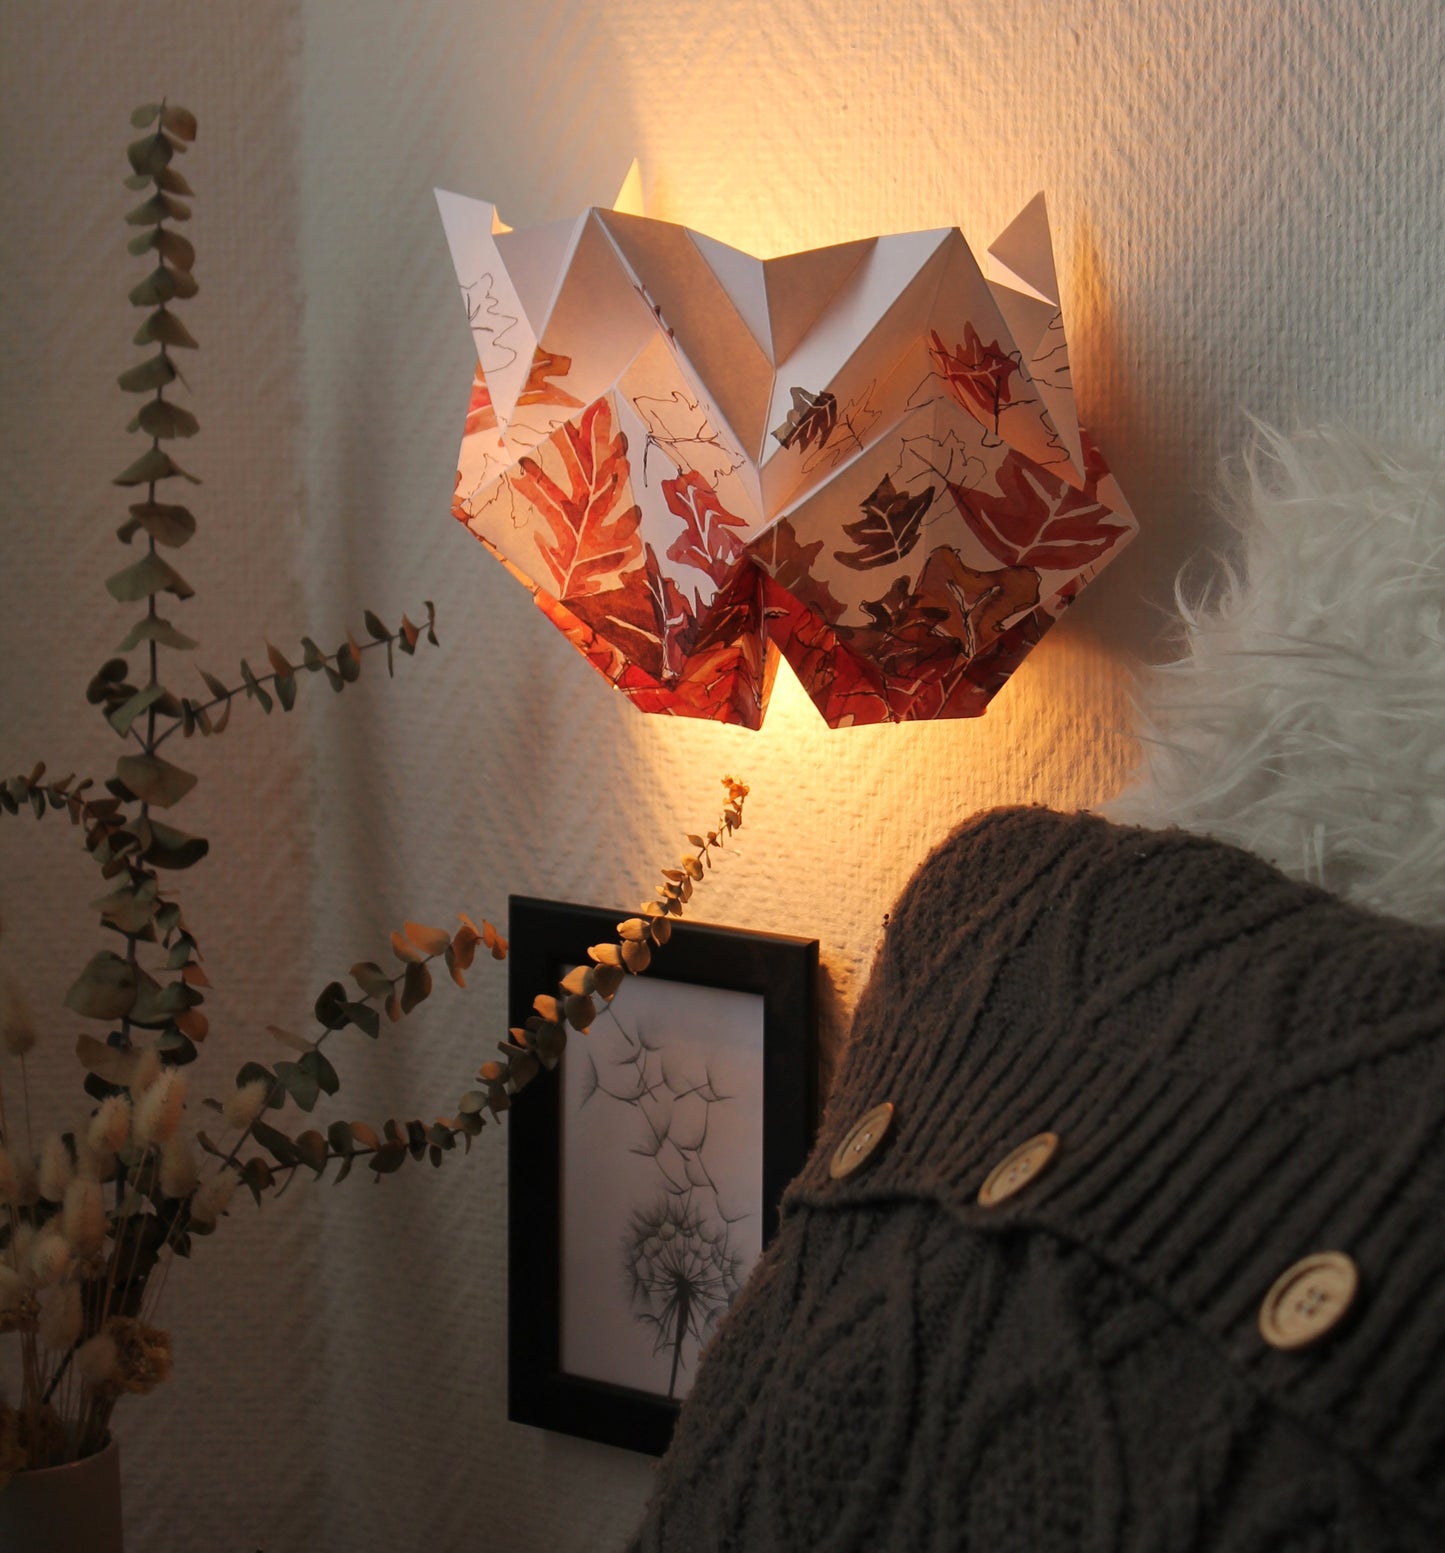 Origami Wall Sconce in Paper - Autumn